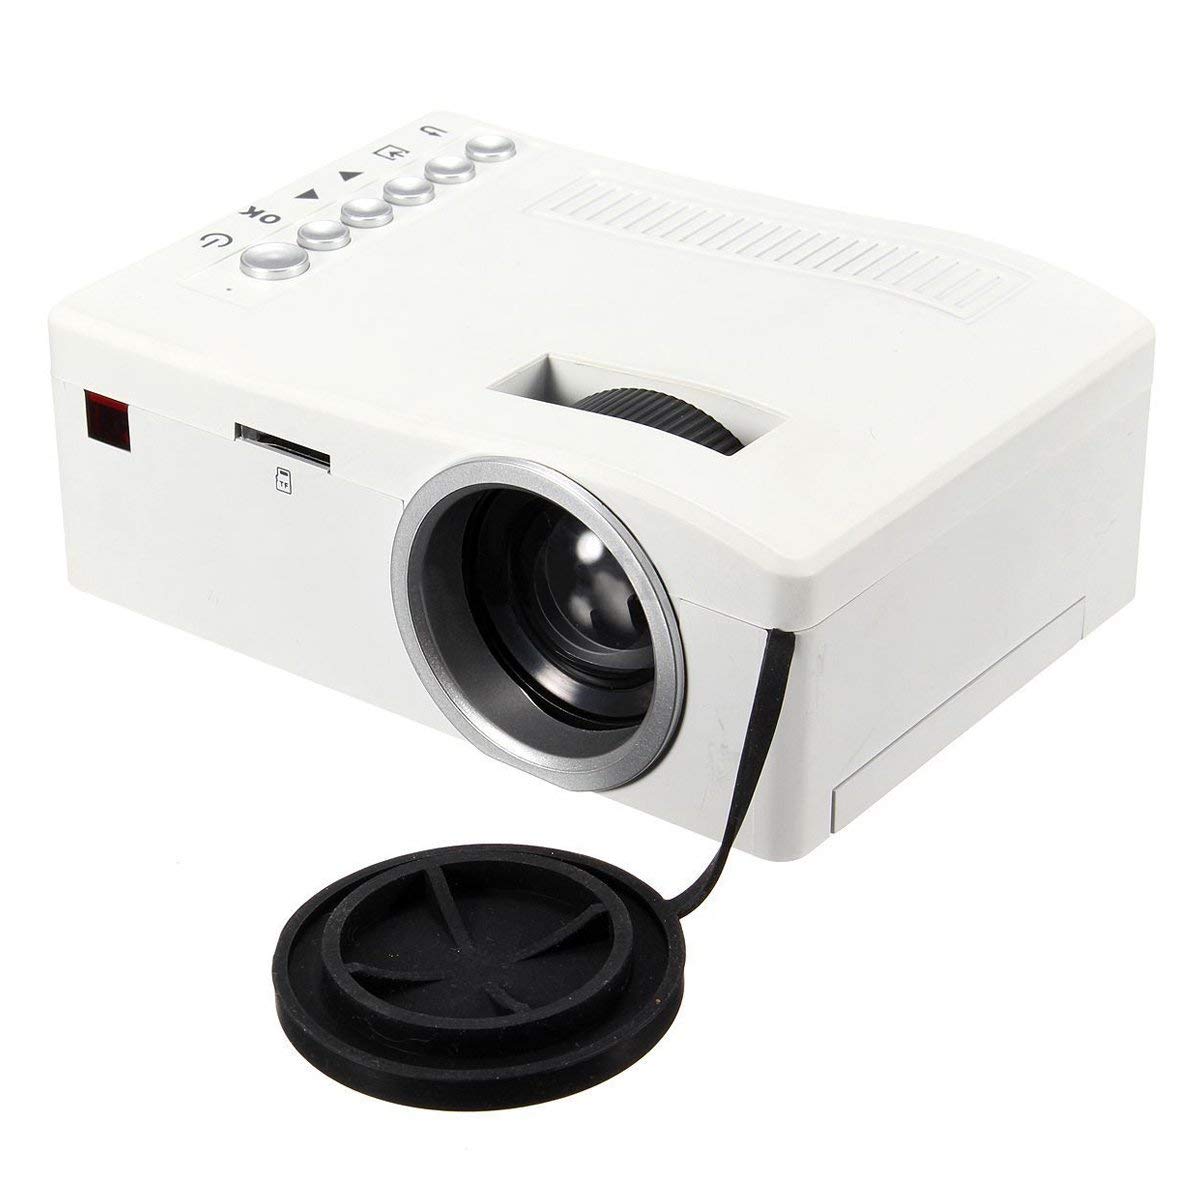 OK, Power Button and other features of TooGoo Projector